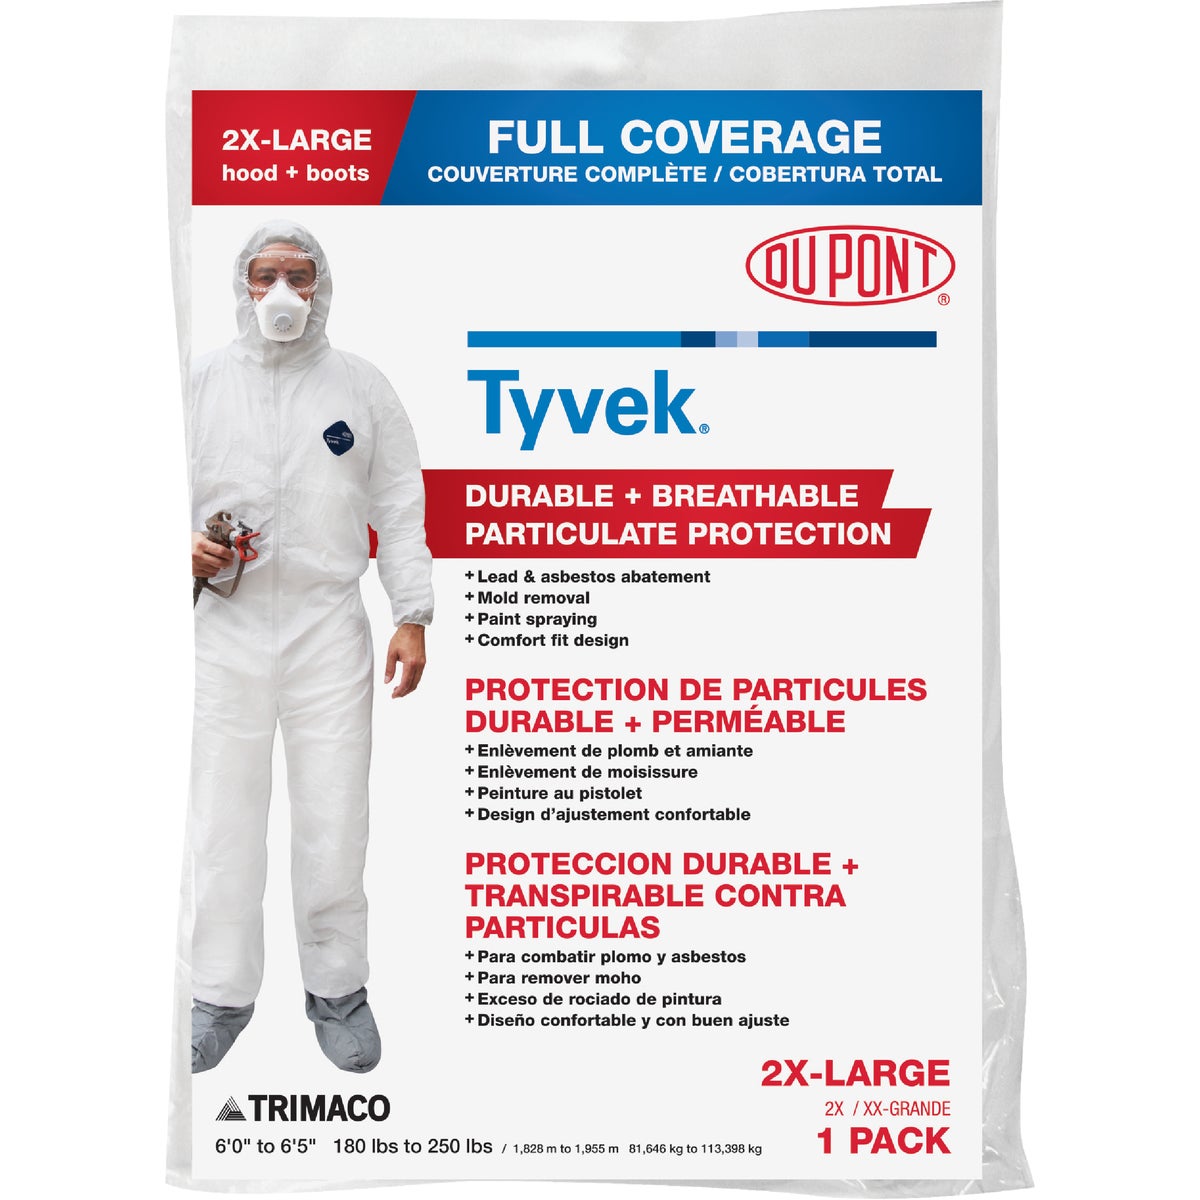 Dupont Tyvek 2XL Hooded Reusable Painter's Coveralls